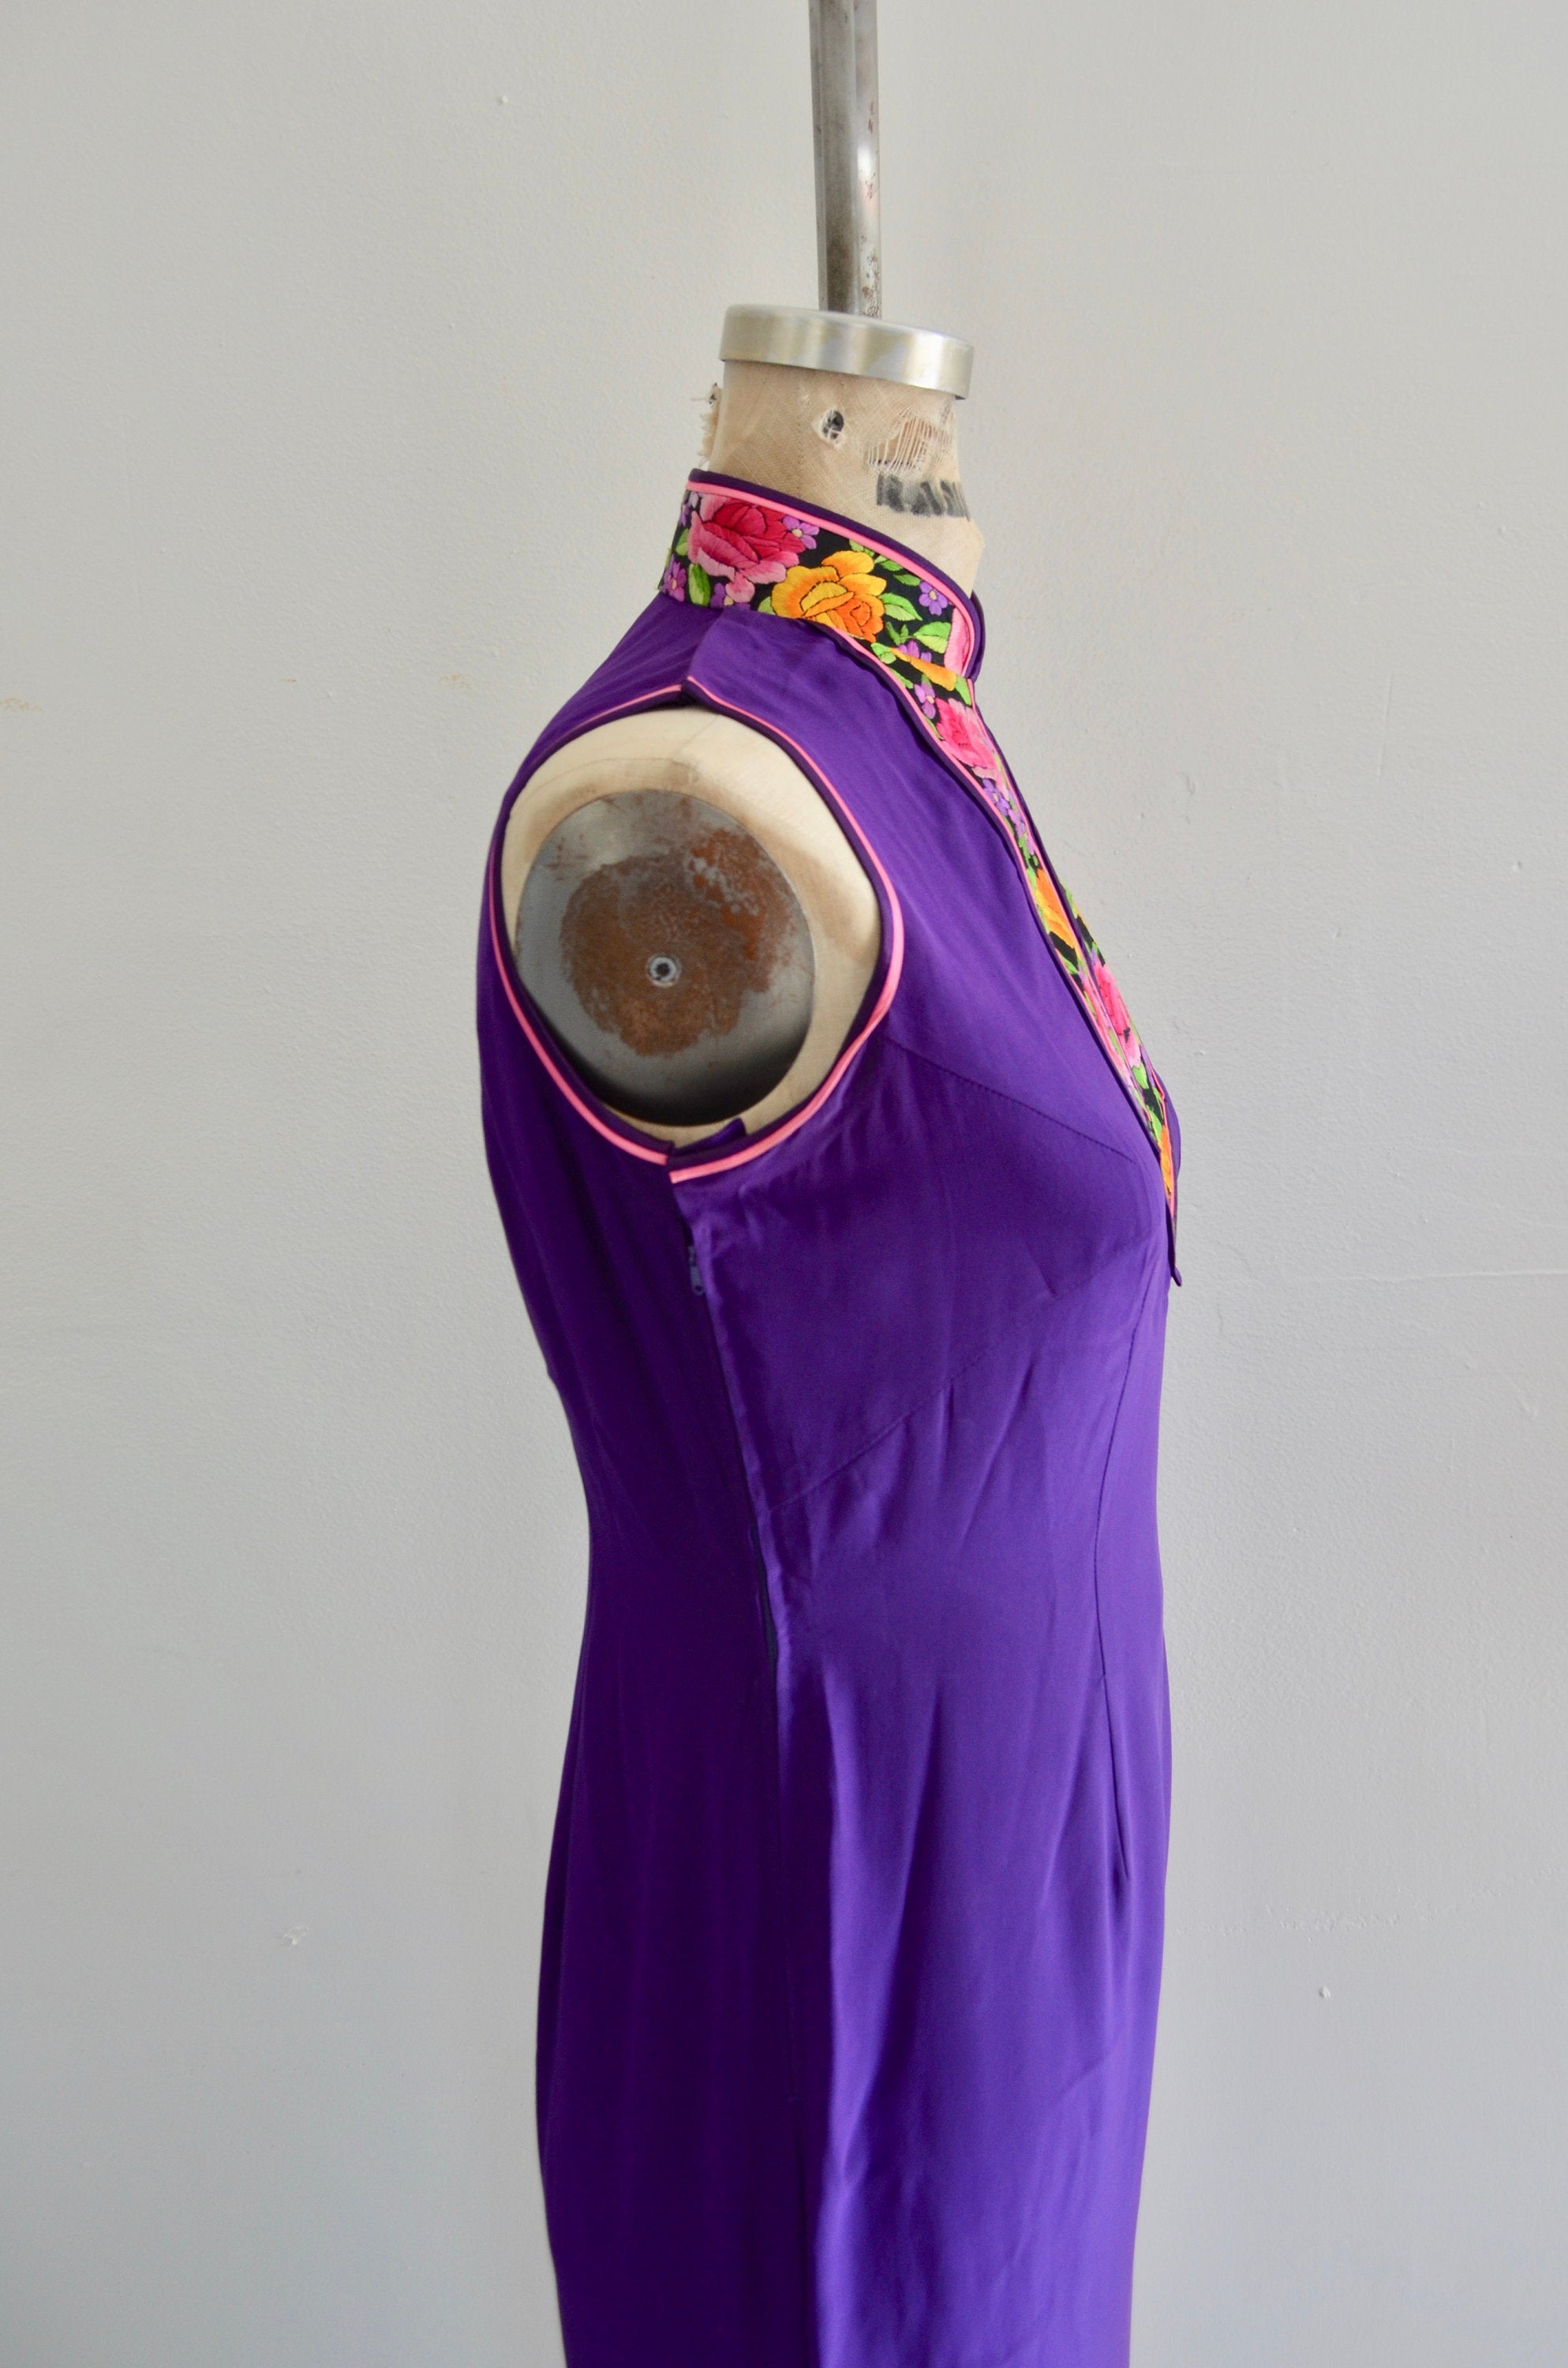 80S Cheongsam Japanese Traditional Purple Floral Colorful Mexican Embroidery Long Slit Dress